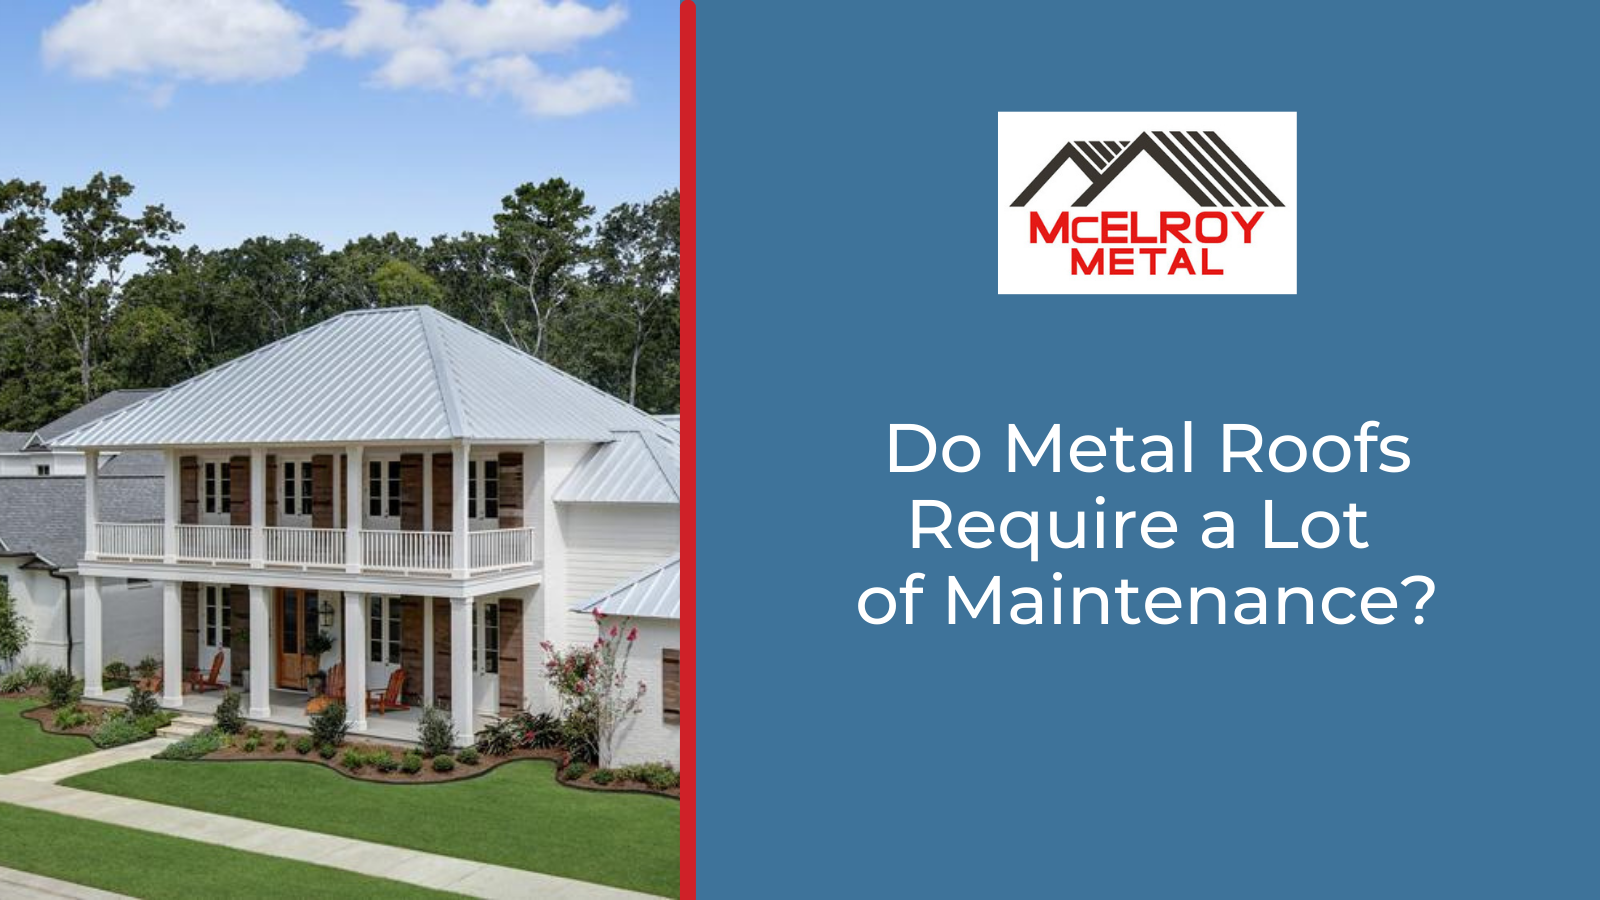 Do Metal Roofs Require a Lot of Maintenance?